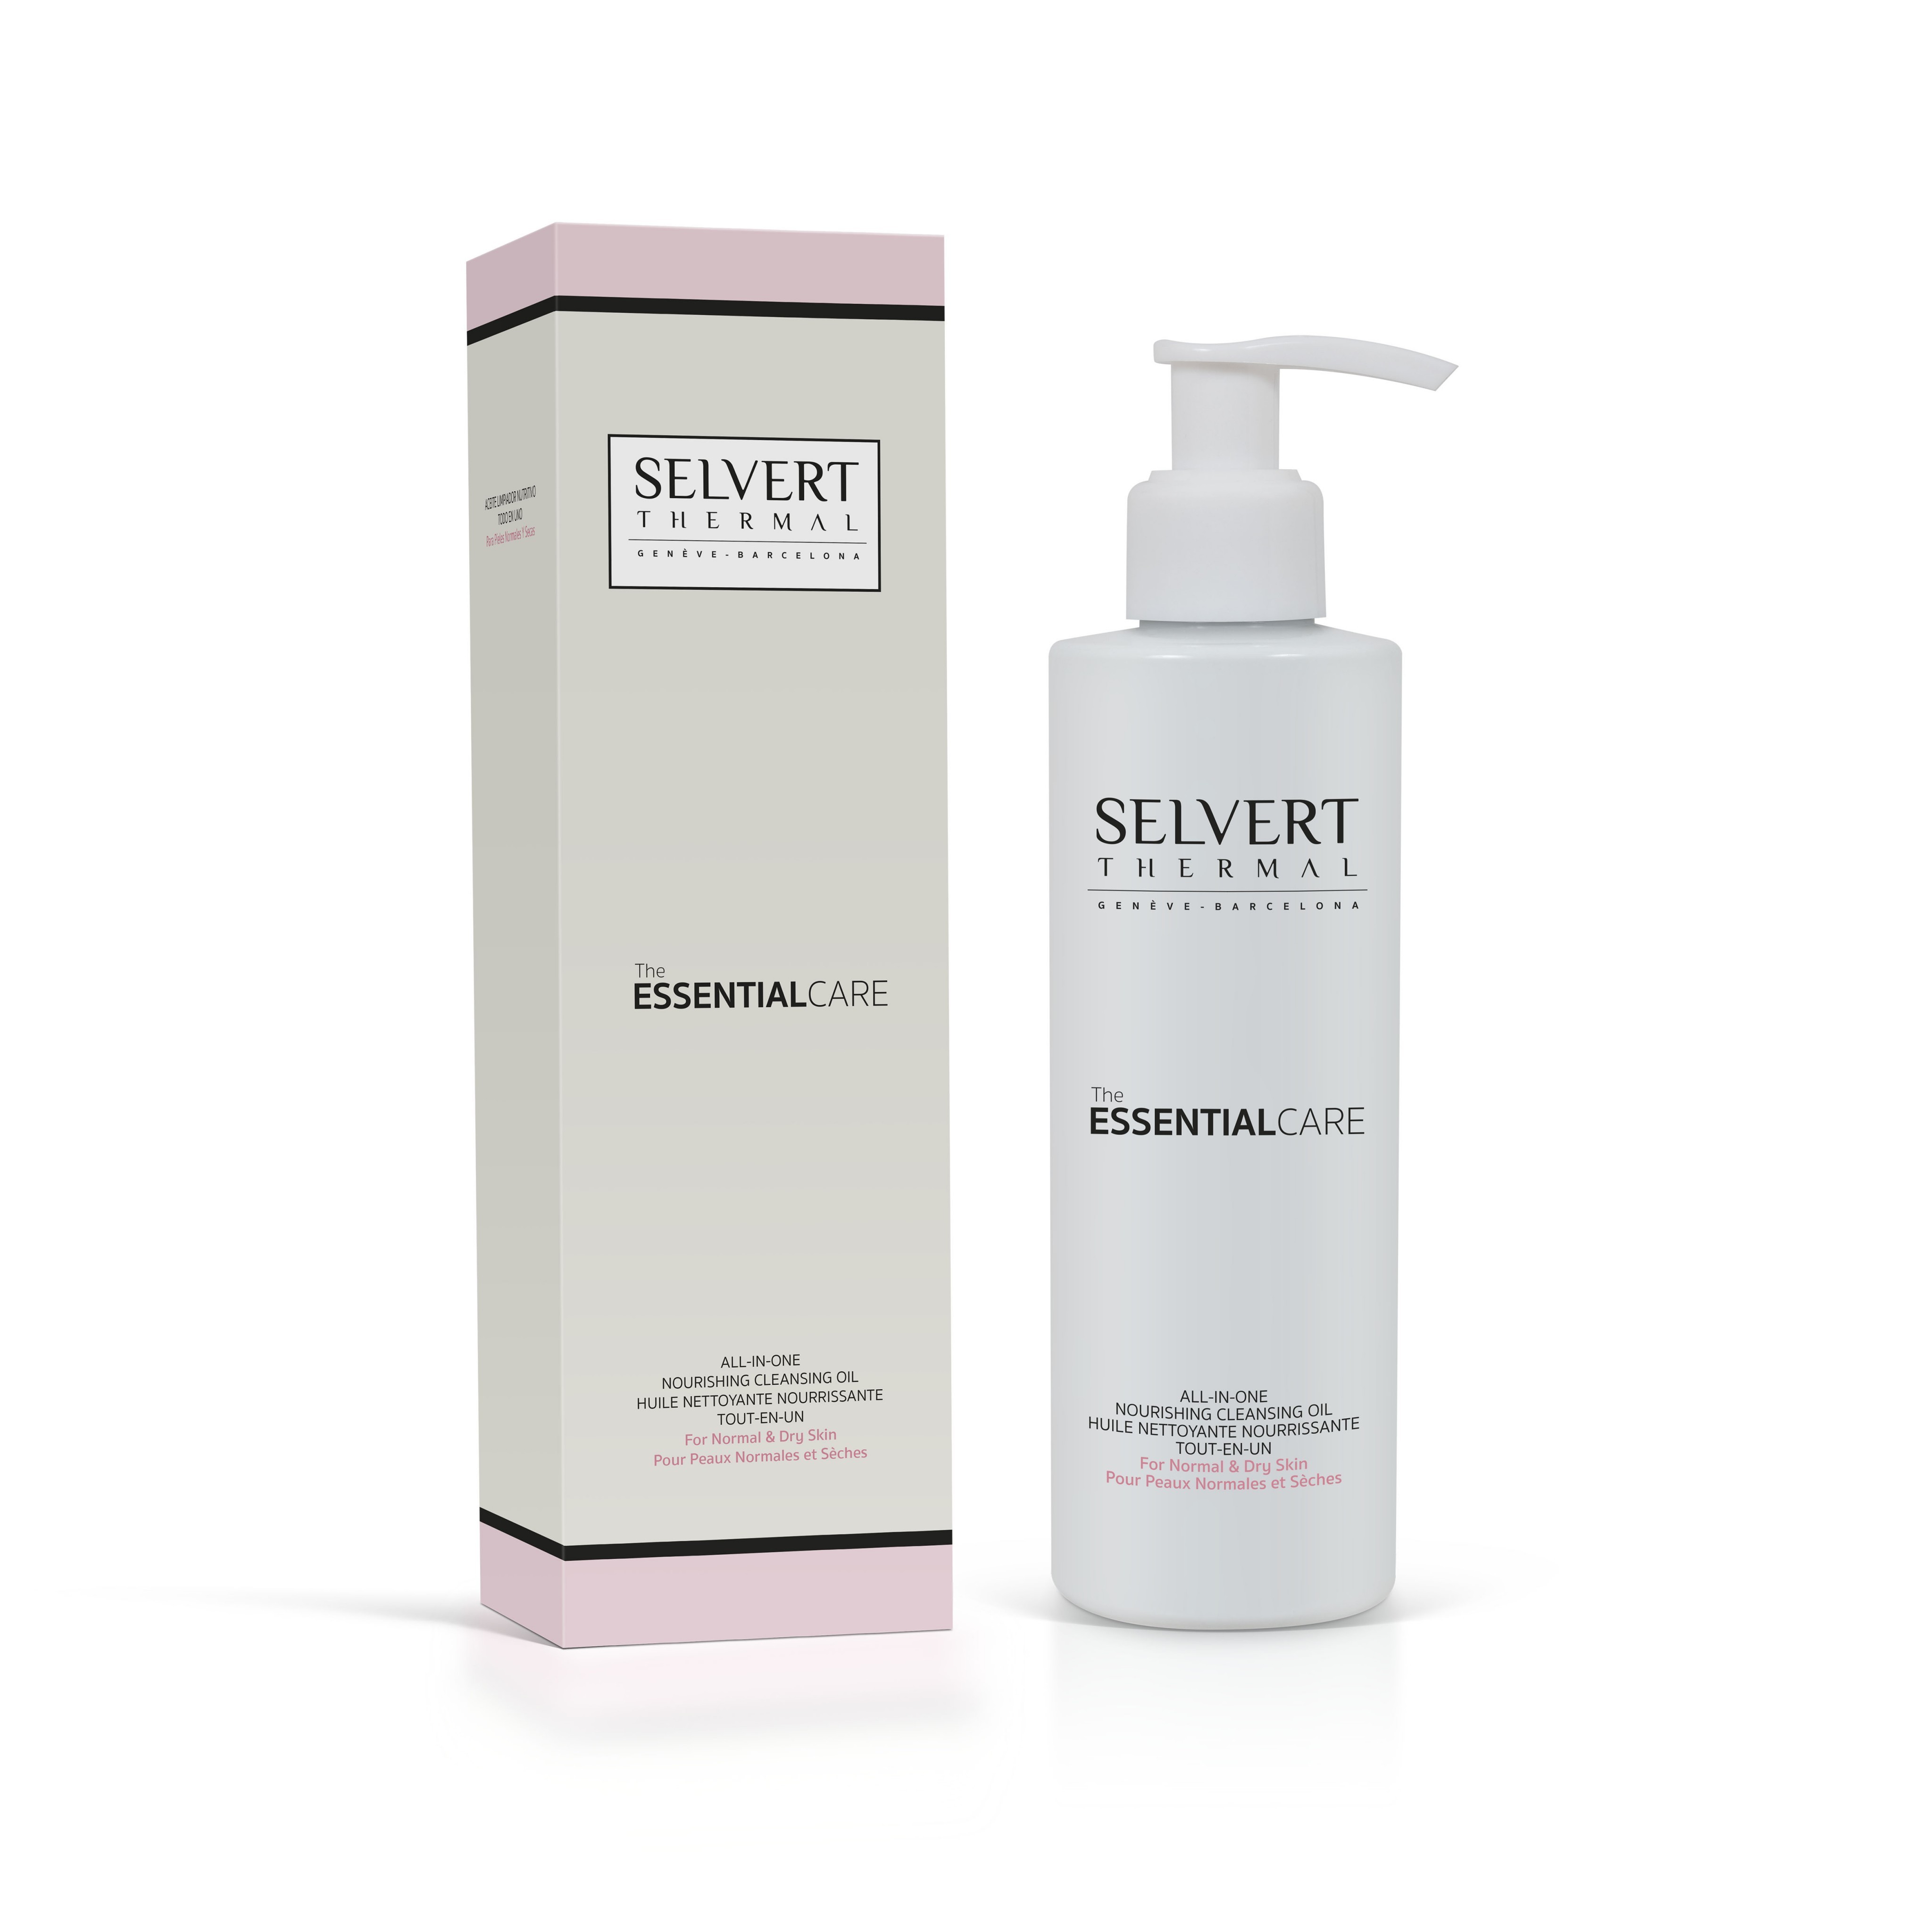 Gentle oil cleanser for dry, normal and mature skin